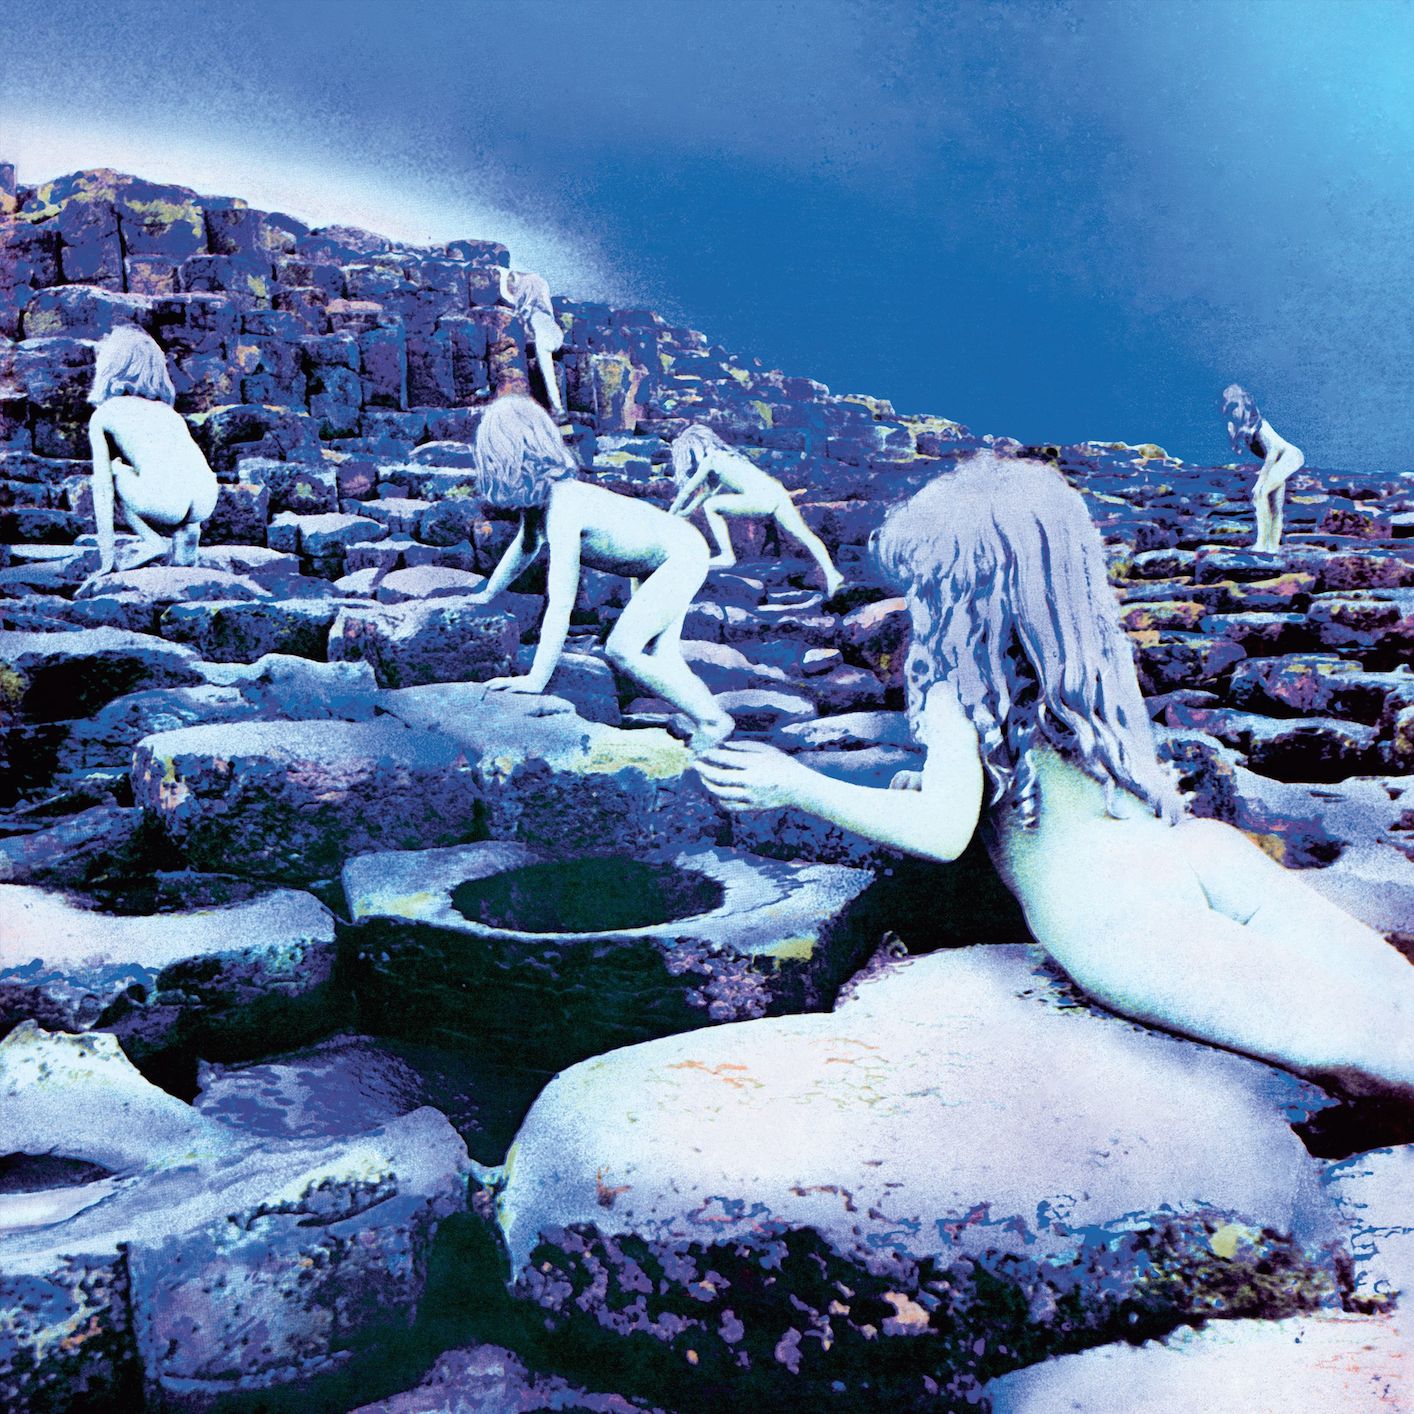 Led Zeppelin – House Of The Holy (Deluxe Edition) (1973/2014) [Official Digital Download 24bit/96kHz]